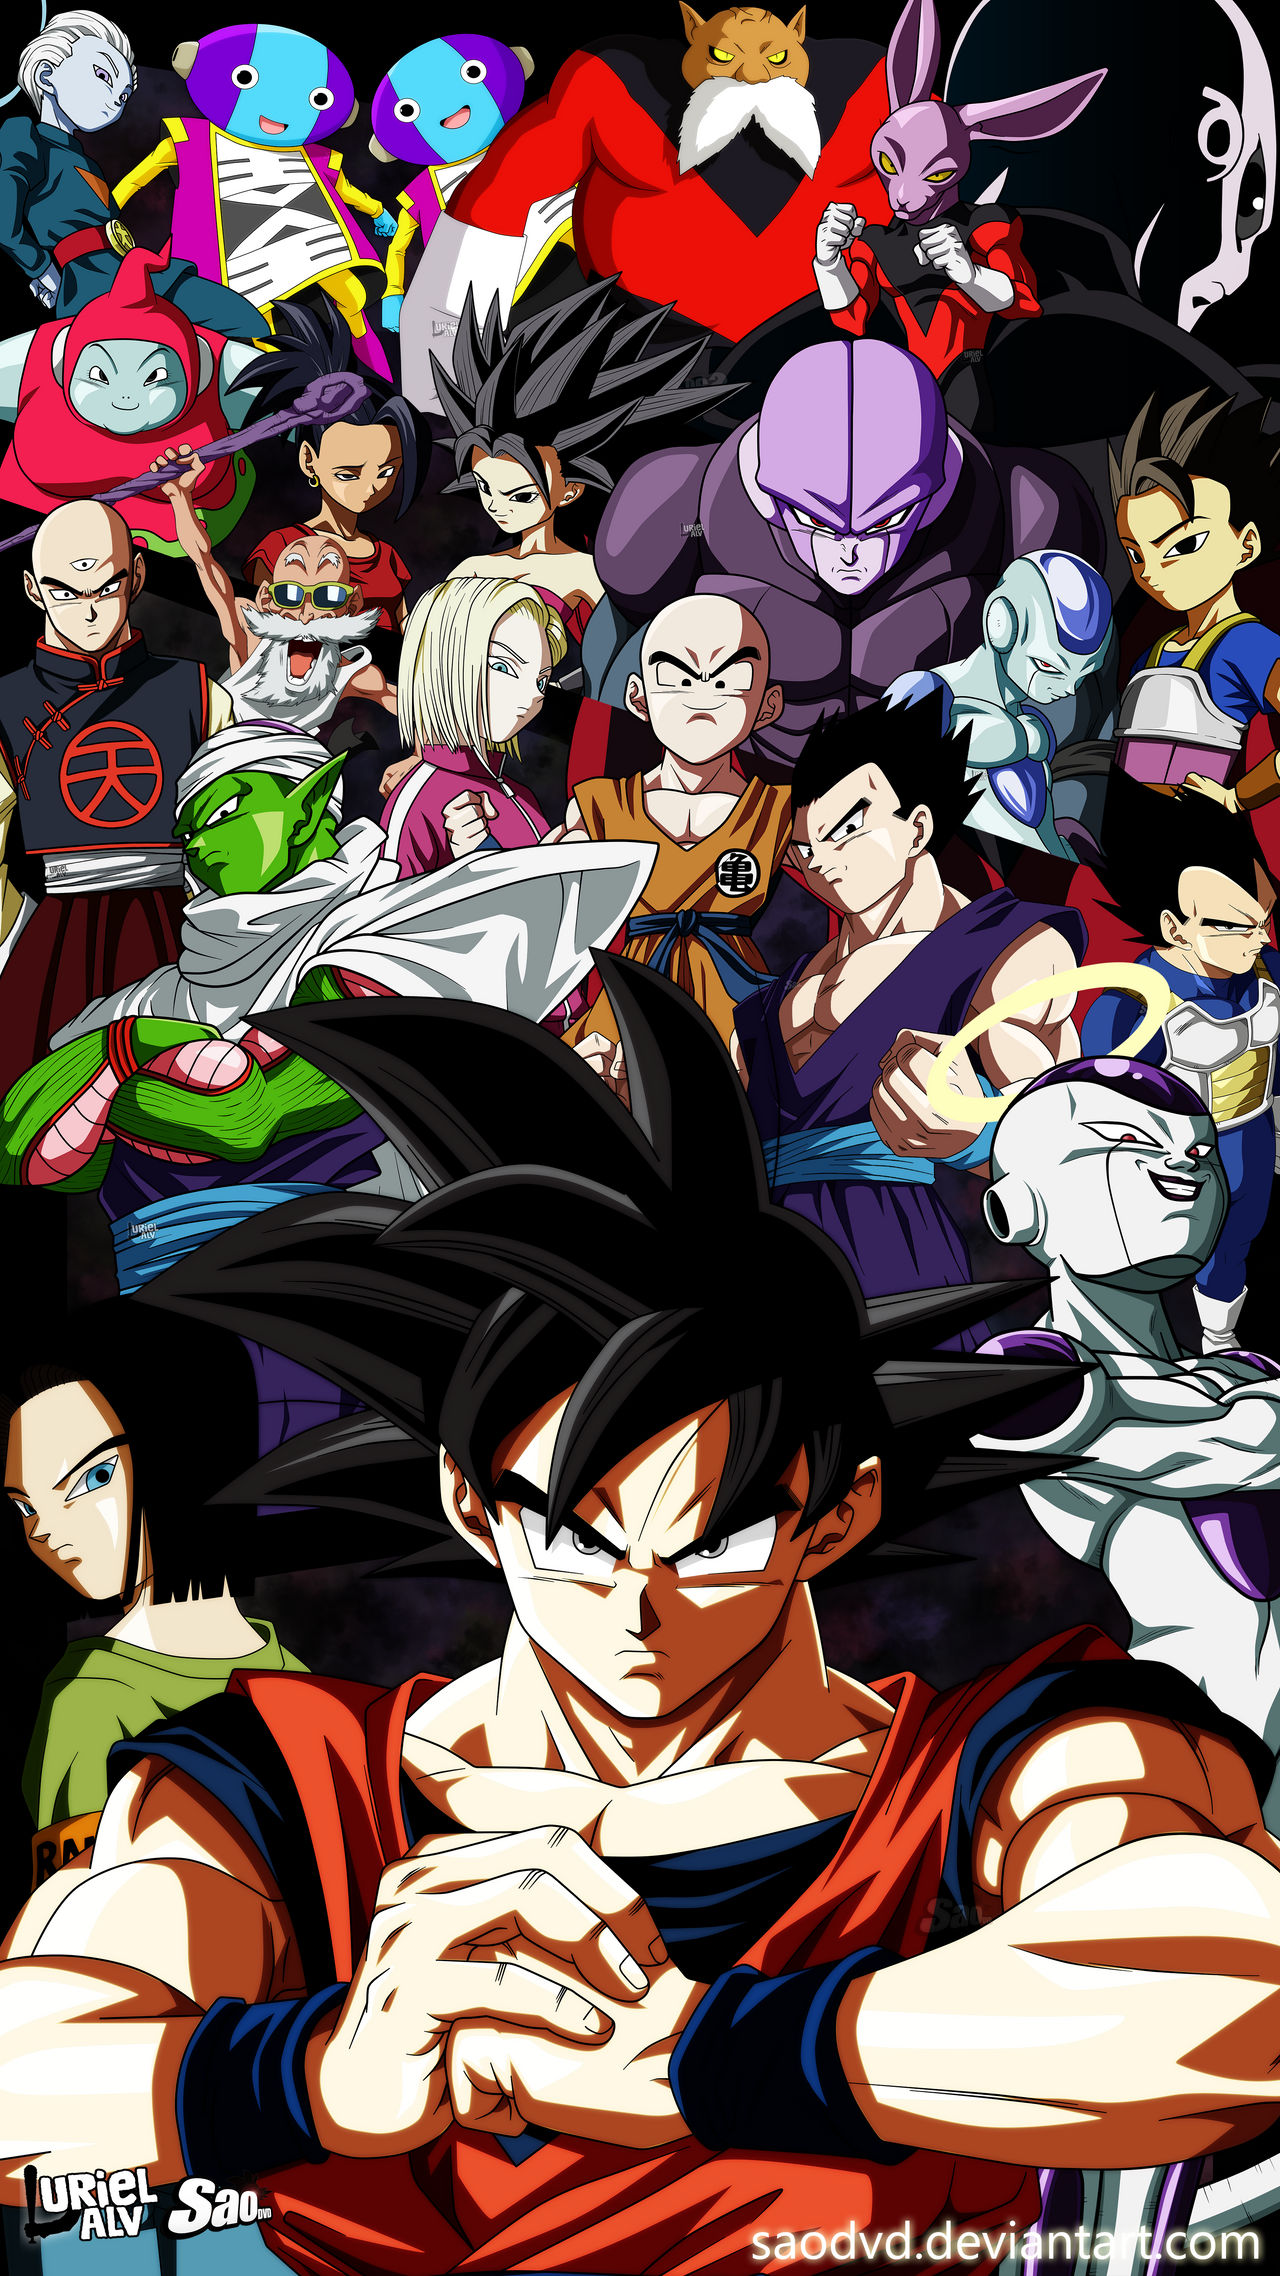 Dragon Ball Super - Thanks For 4 Ages by SaoDVD on DeviantArt